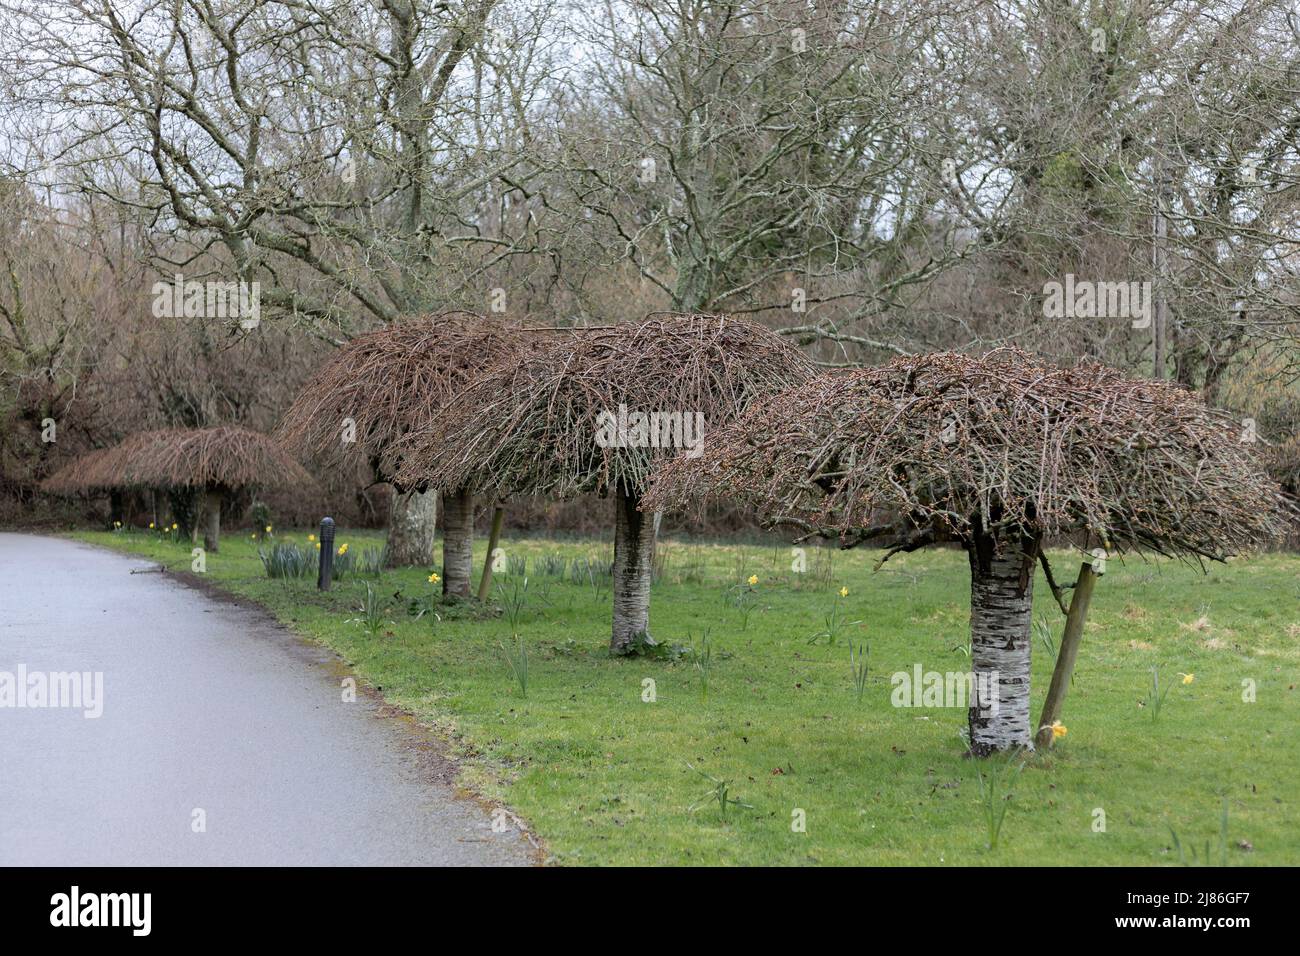 Four silver birch trees that have been trimmed in a such a way that they resemble umbrellas and do not look at all natural Stock Photo